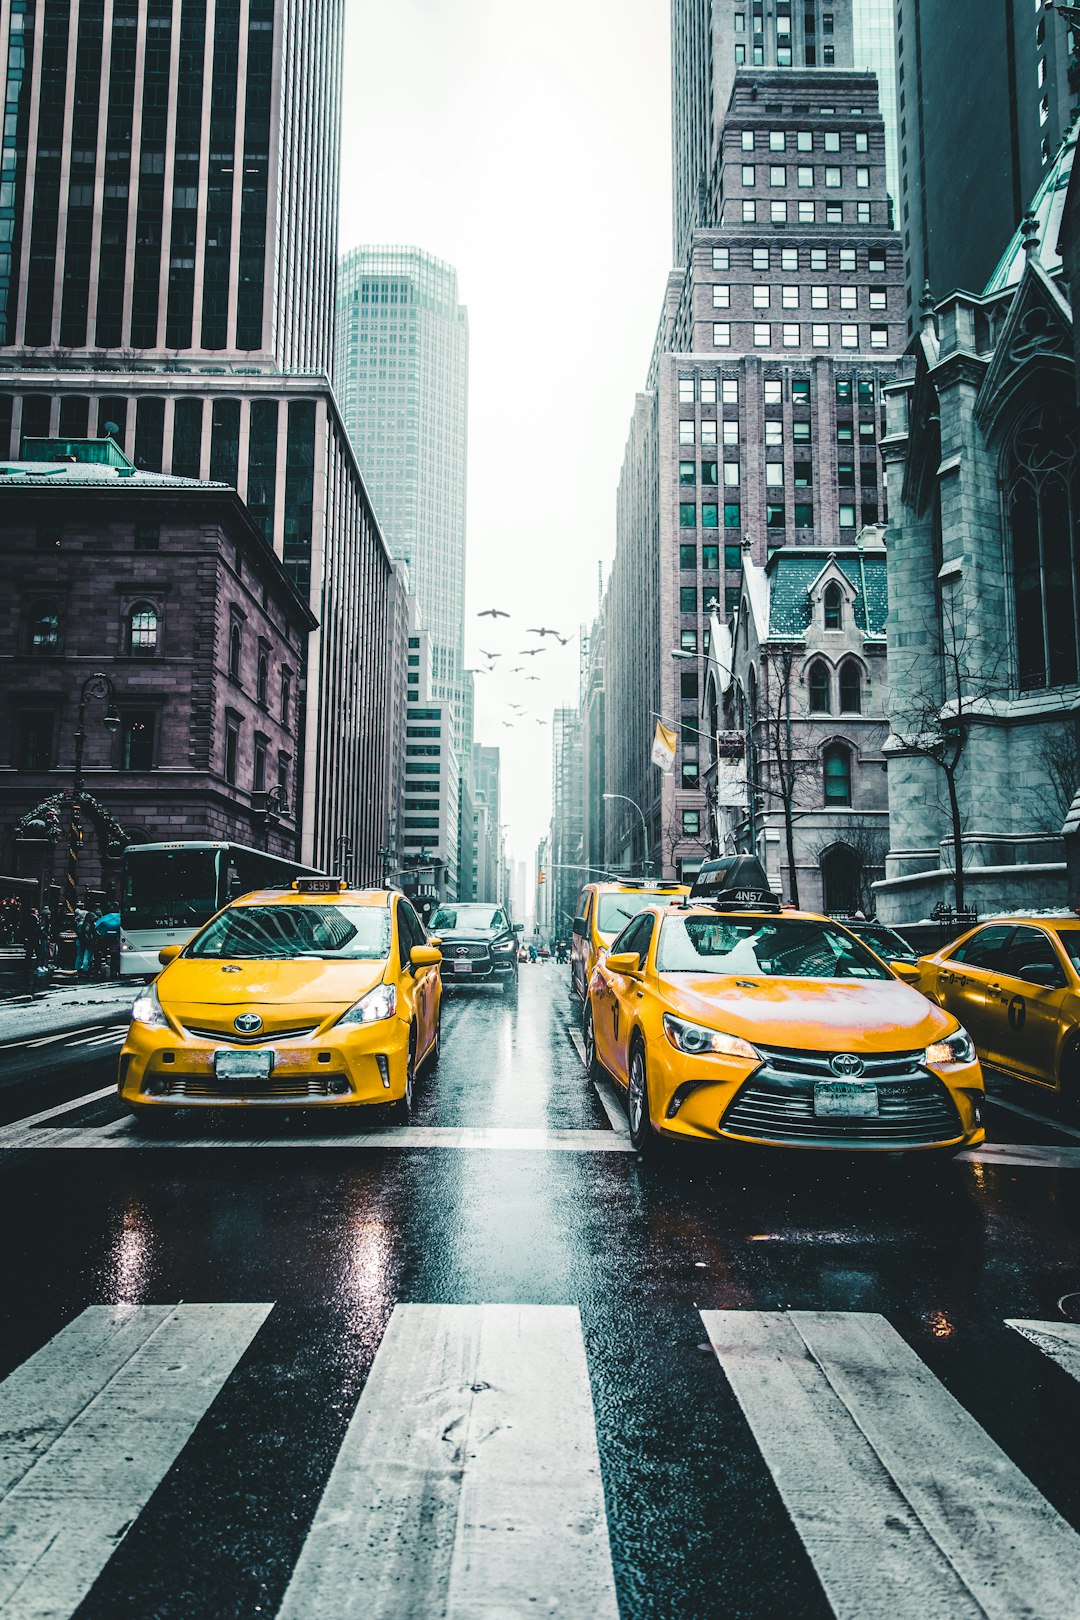 The Streets of NYC.